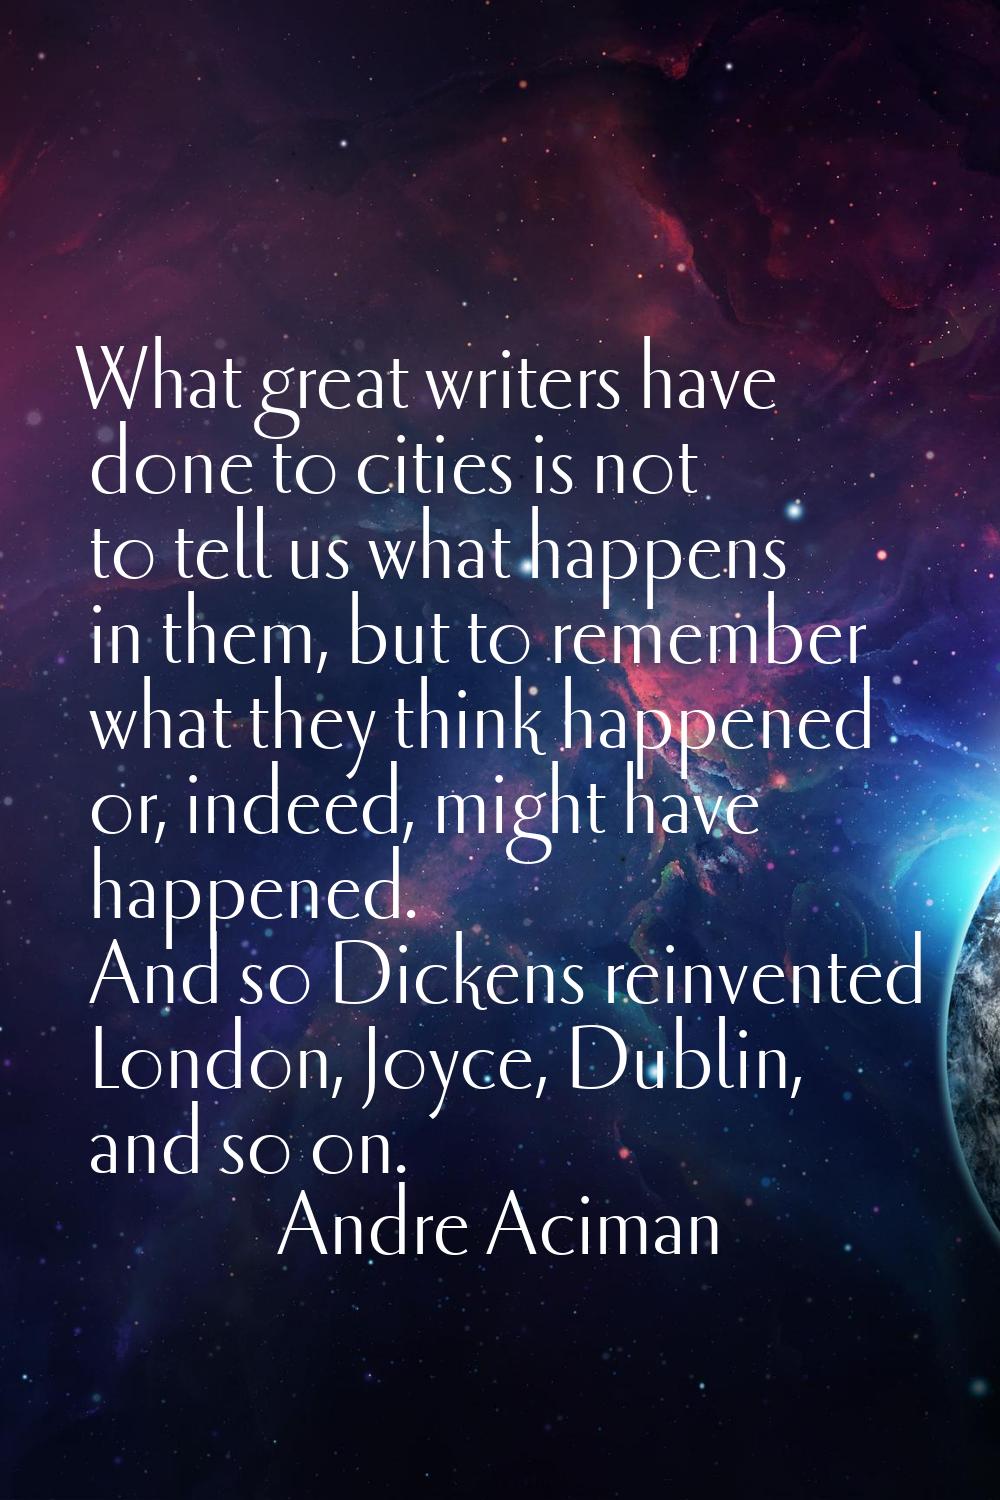 What great writers have done to cities is not to tell us what happens in them, but to remember what